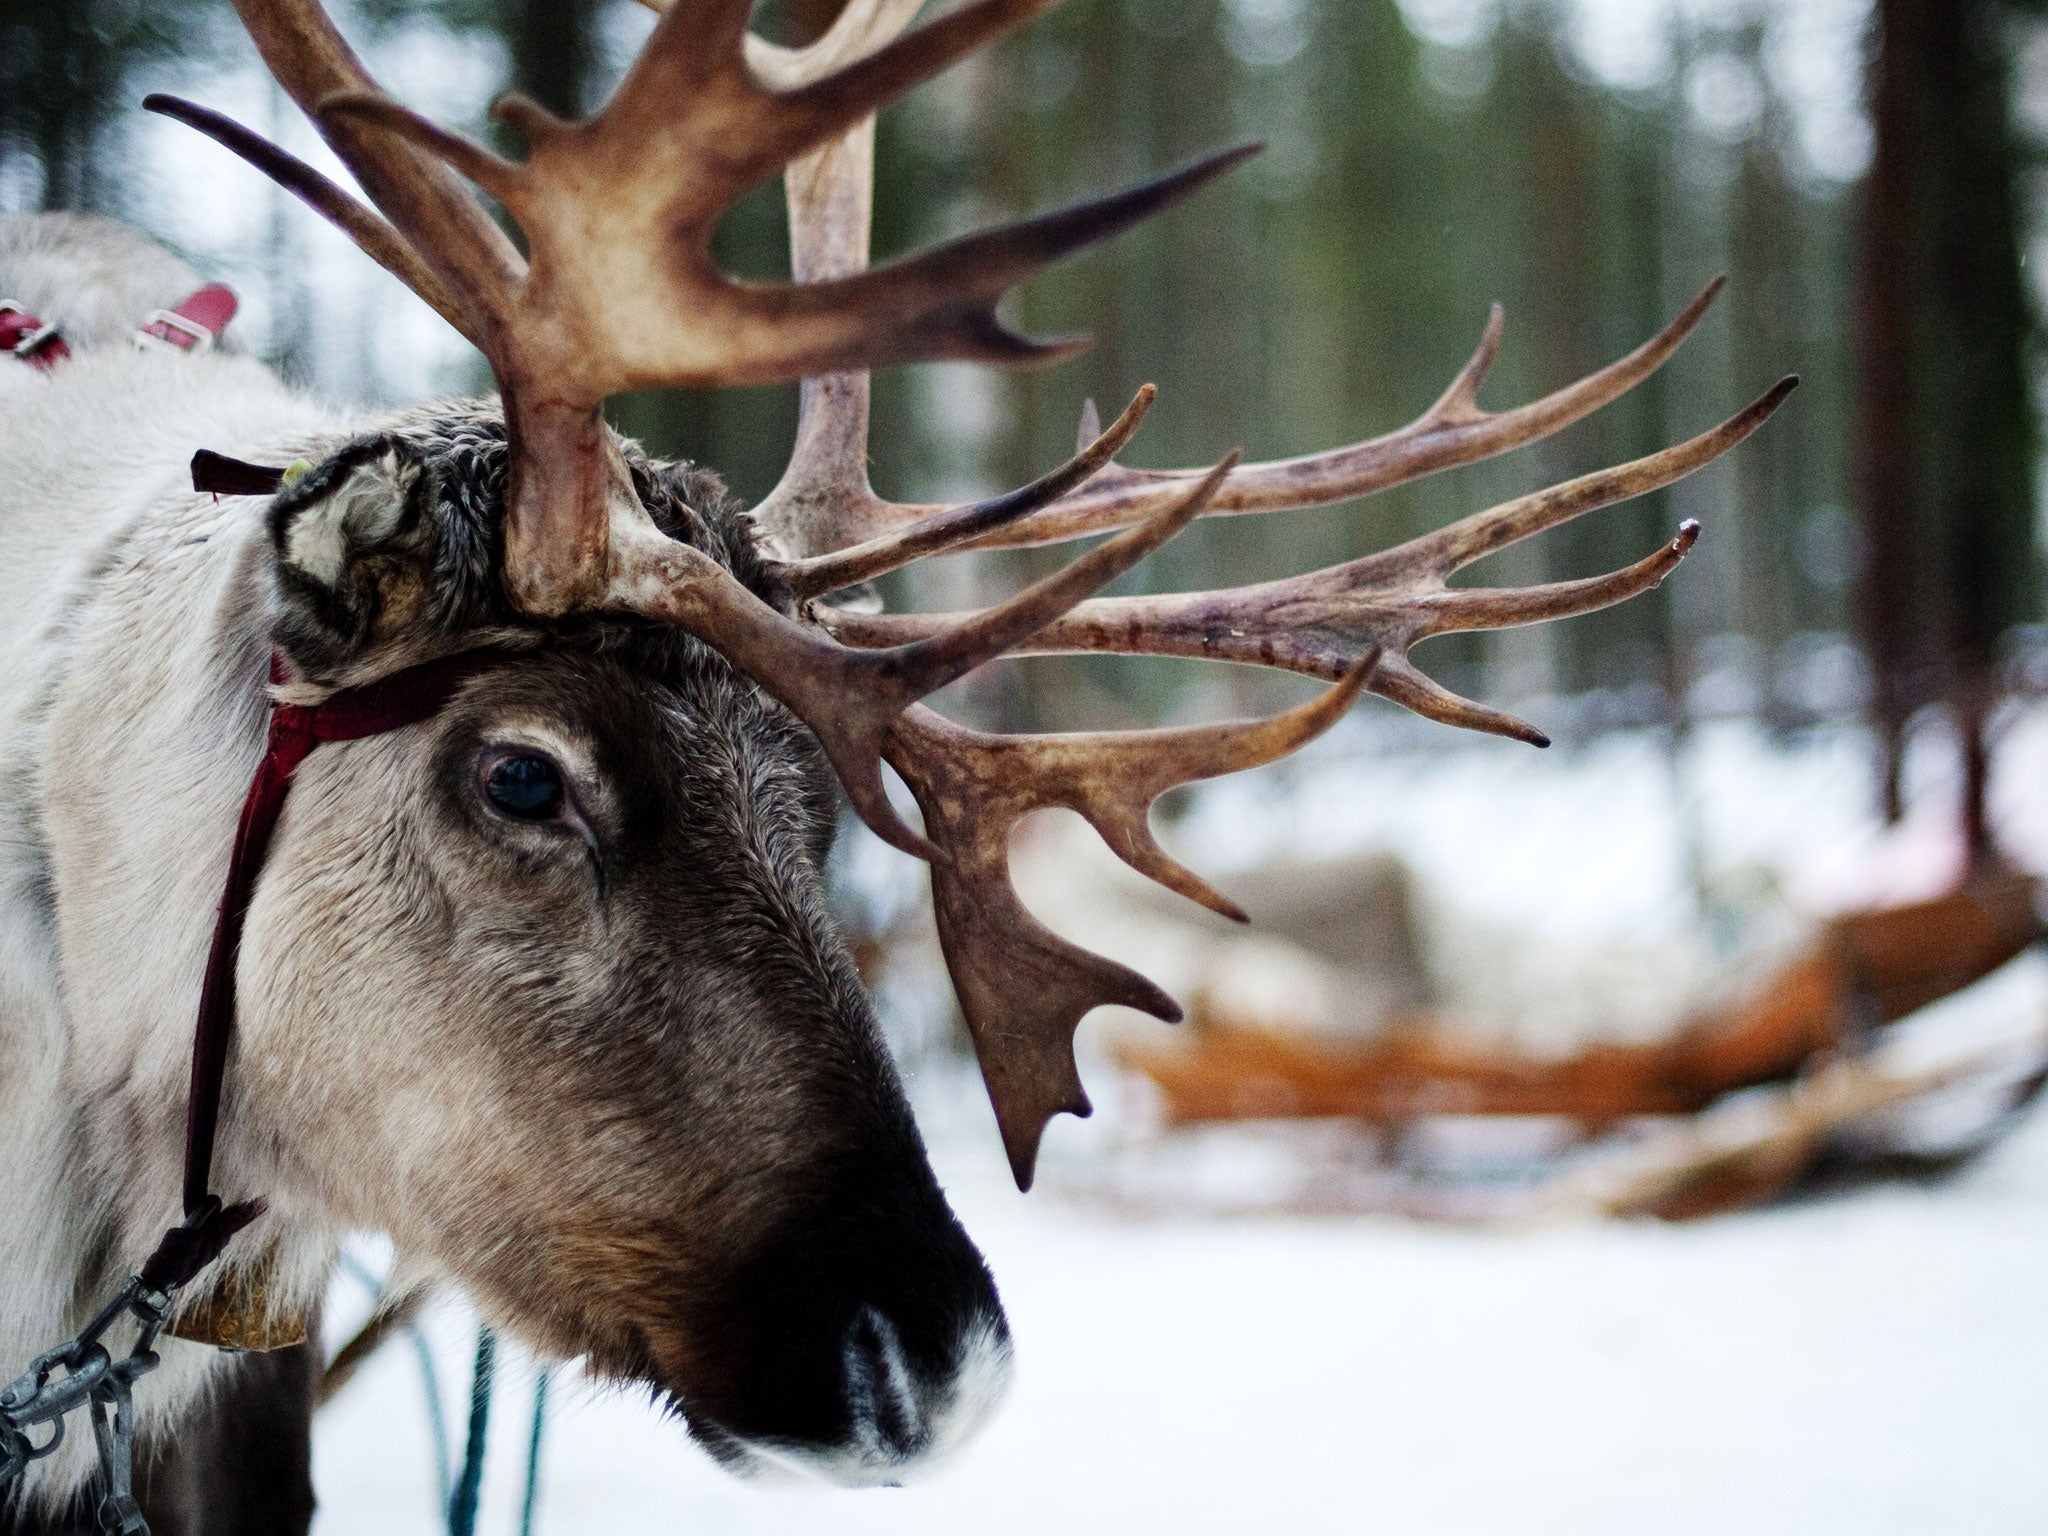 A dramatic increase in the number of people who enjoy the taste of reindeer is putting pressure on stocks in Finland